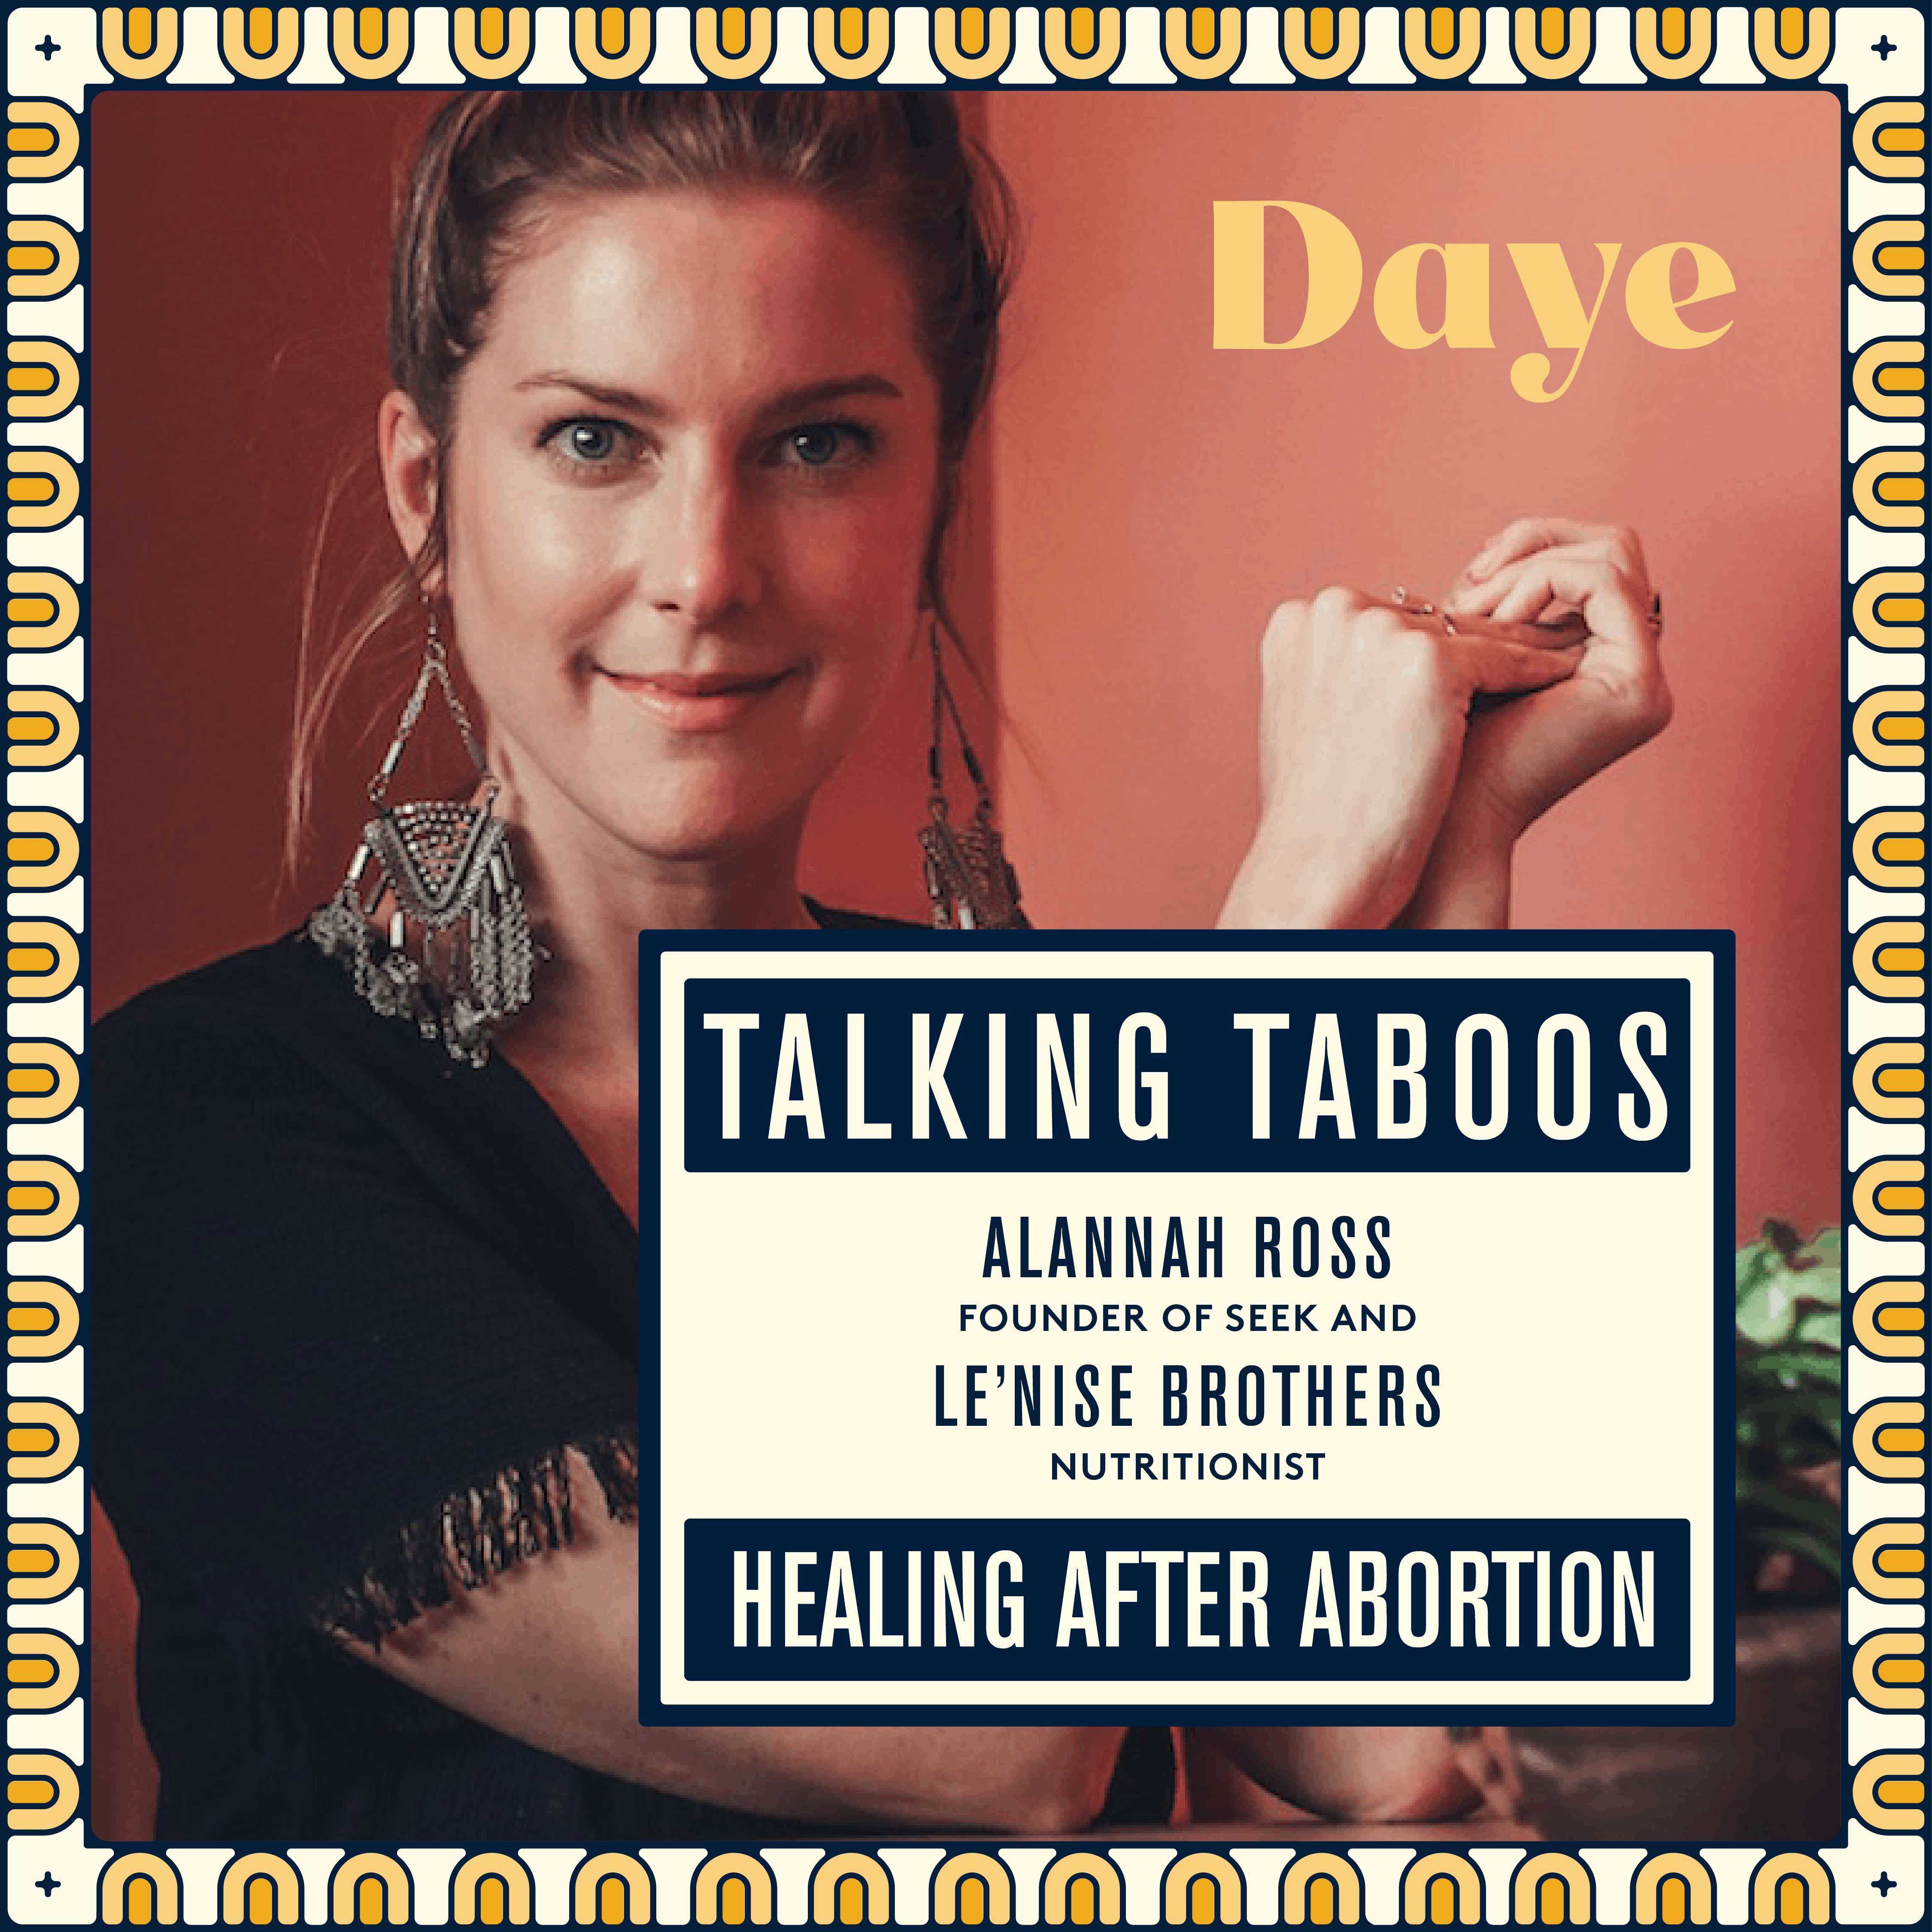 Talking Taboos with Daye: Healing after an Abortion with Alannah Ross